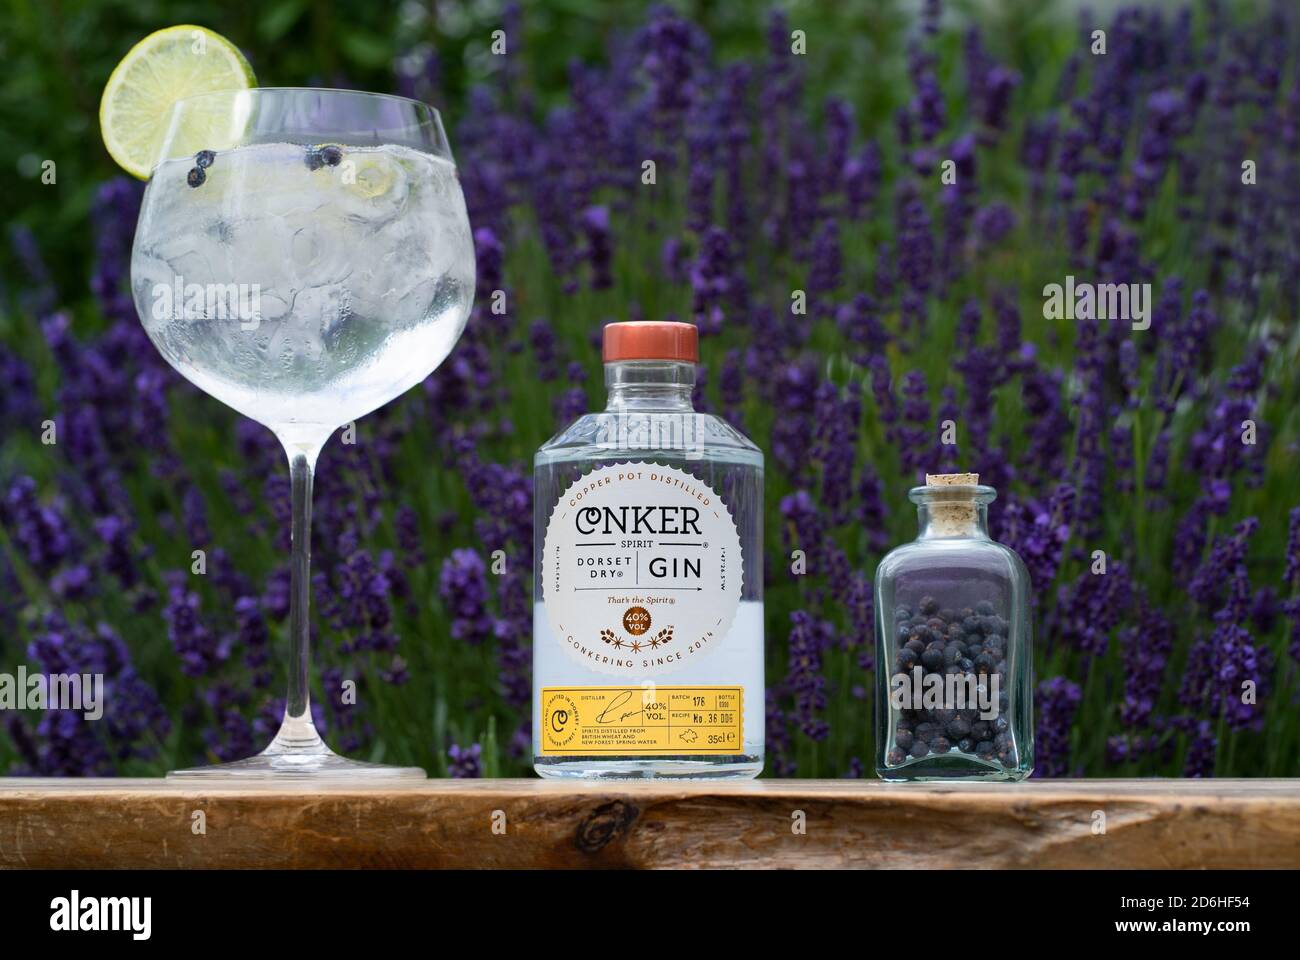 Large gin and tonic drinks glass containing ice and lemon with Conker Dorset Dry Gin bottle in front of lavender bush. Stock Photo